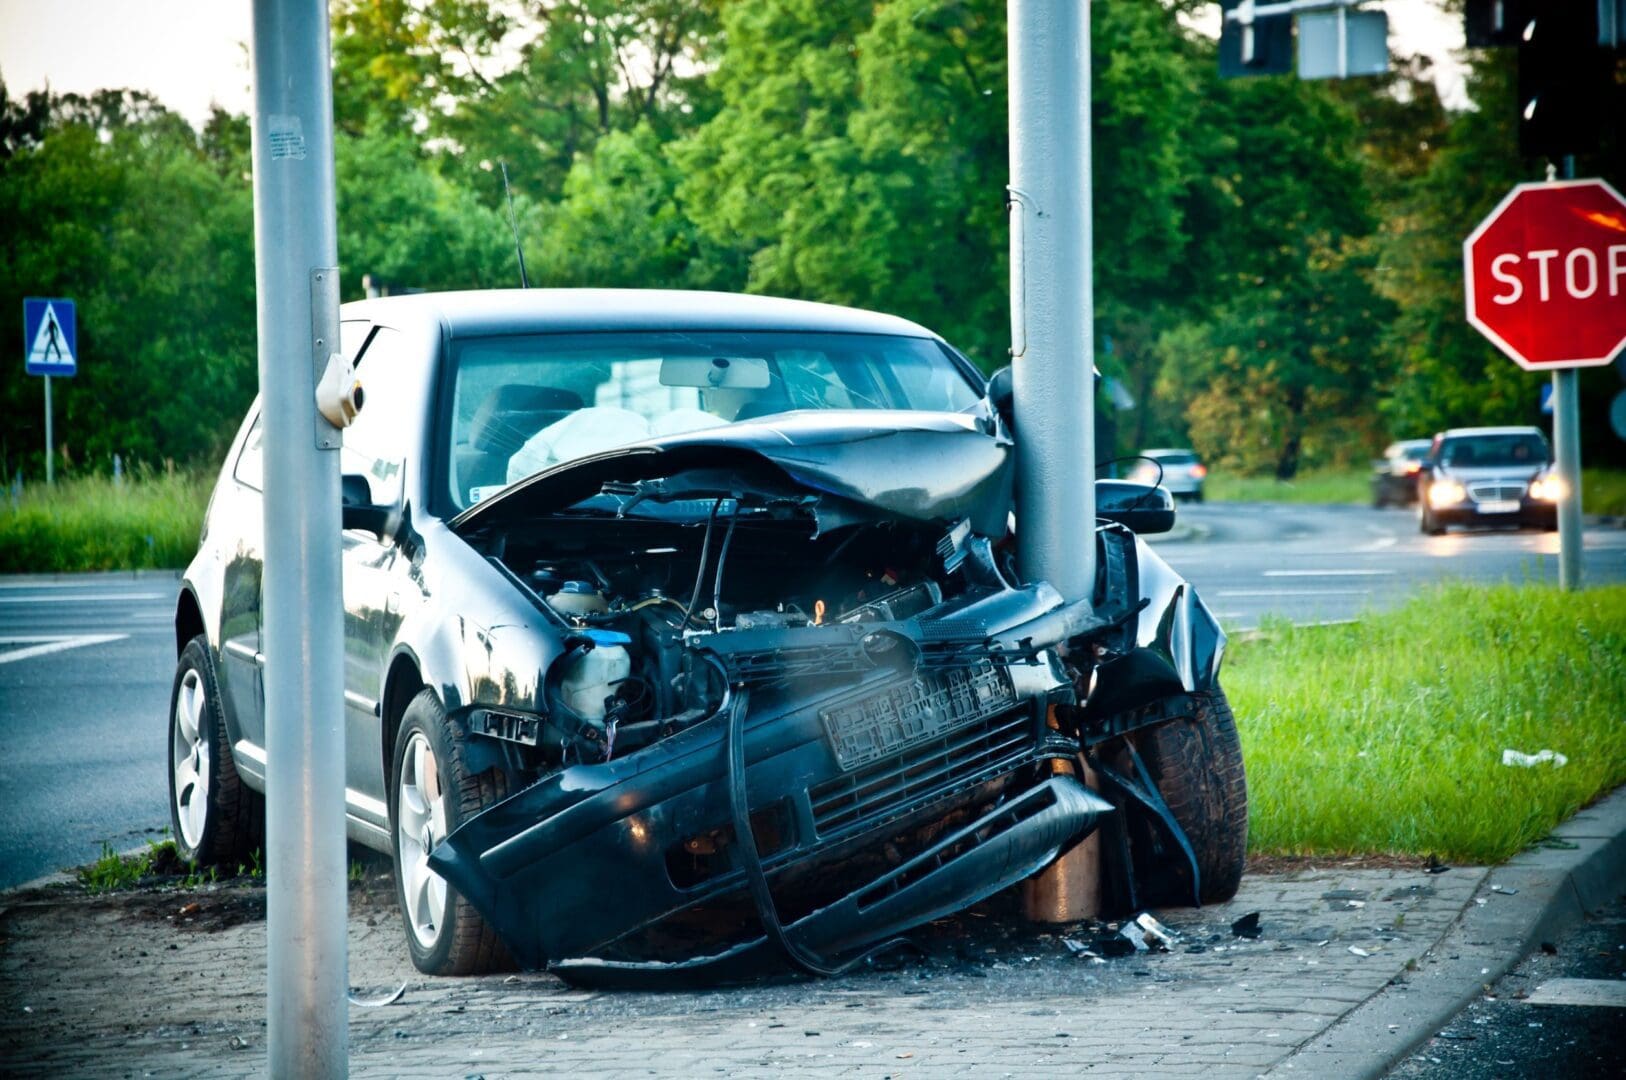 What Are the Steps You Should Take after a Car Accident?